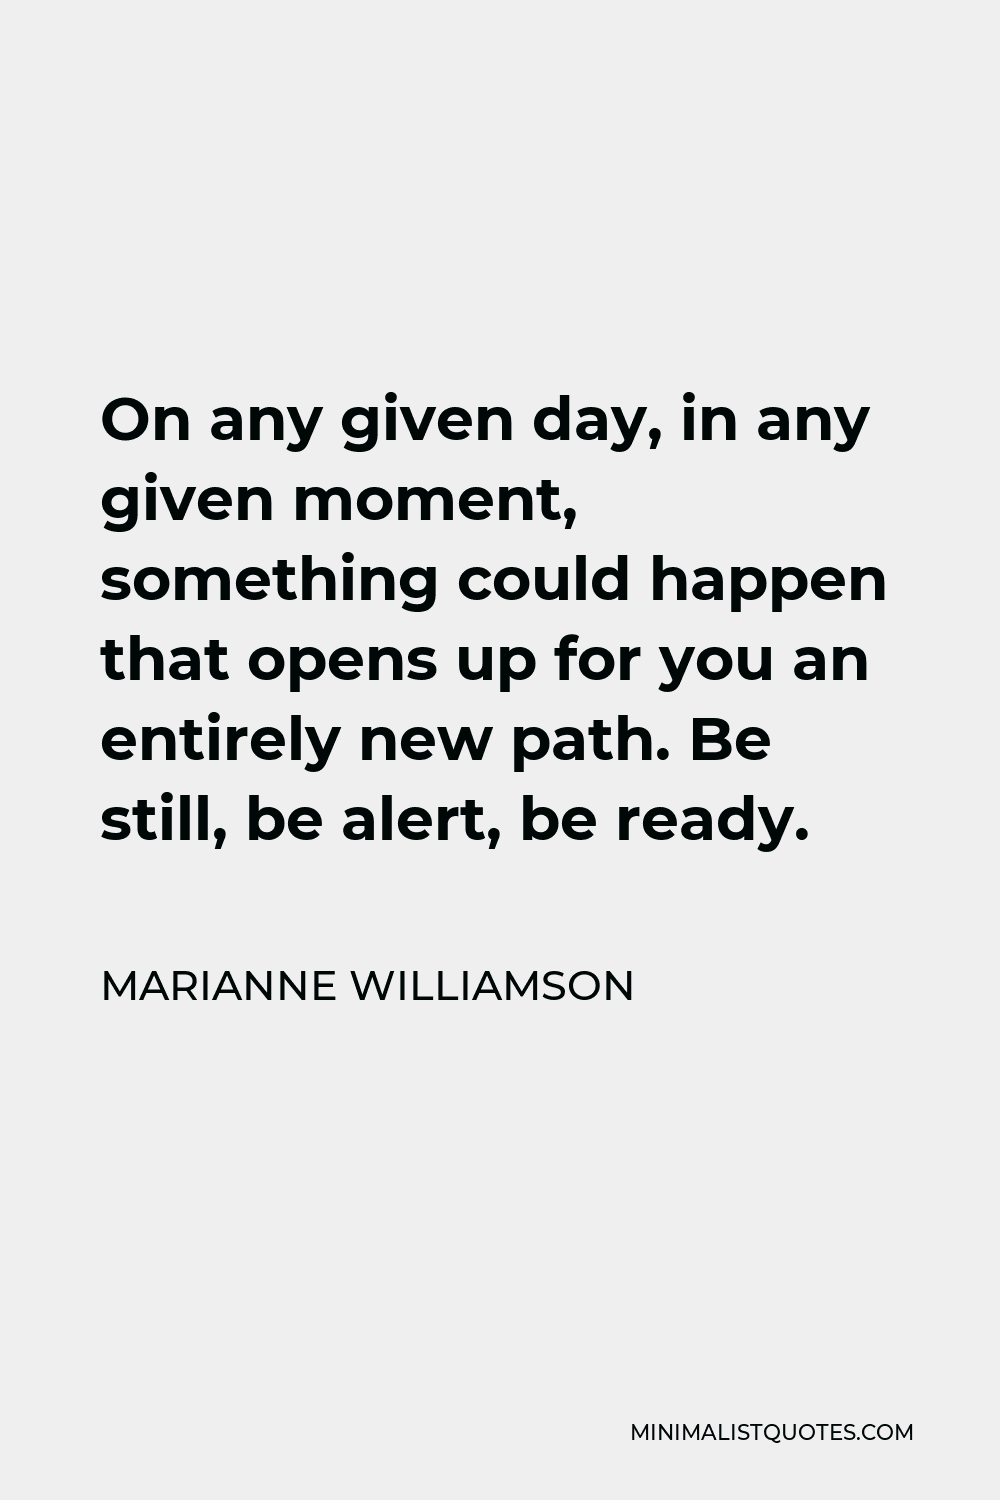 Marianne Williamson Quote - On any given day, in any given moment, something could happen that opens up for you an entirely new path. Be still, be alert, be ready.